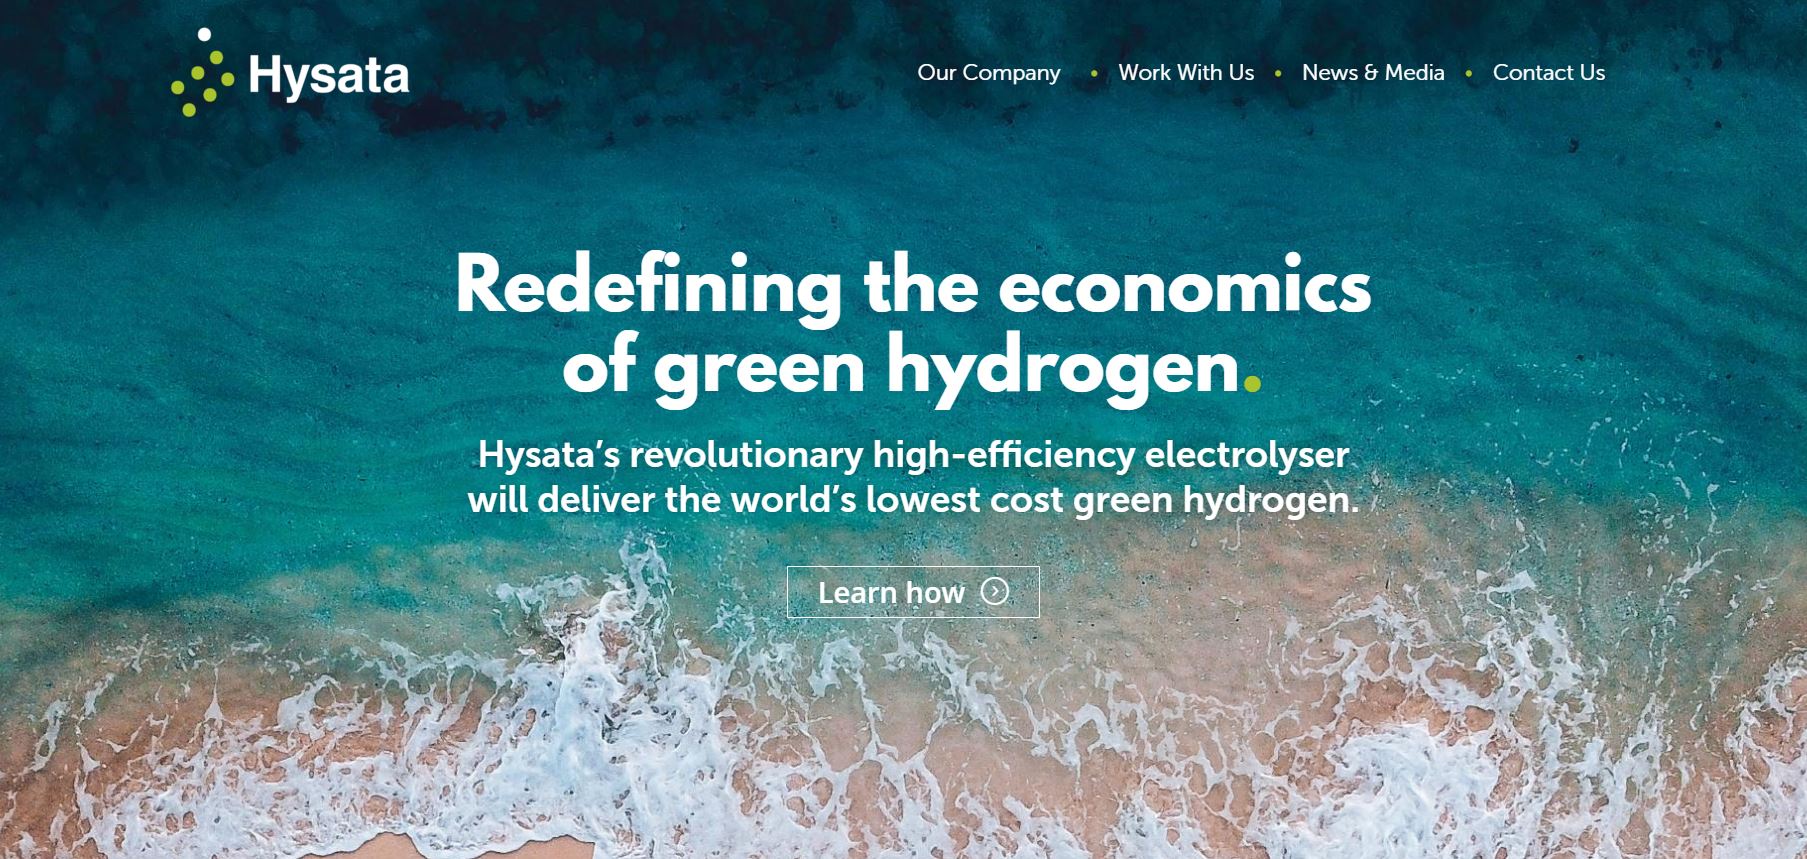 Backed by a staggering $68M in Series B funding, Hysata is at the forefront of the renewables and environment industry